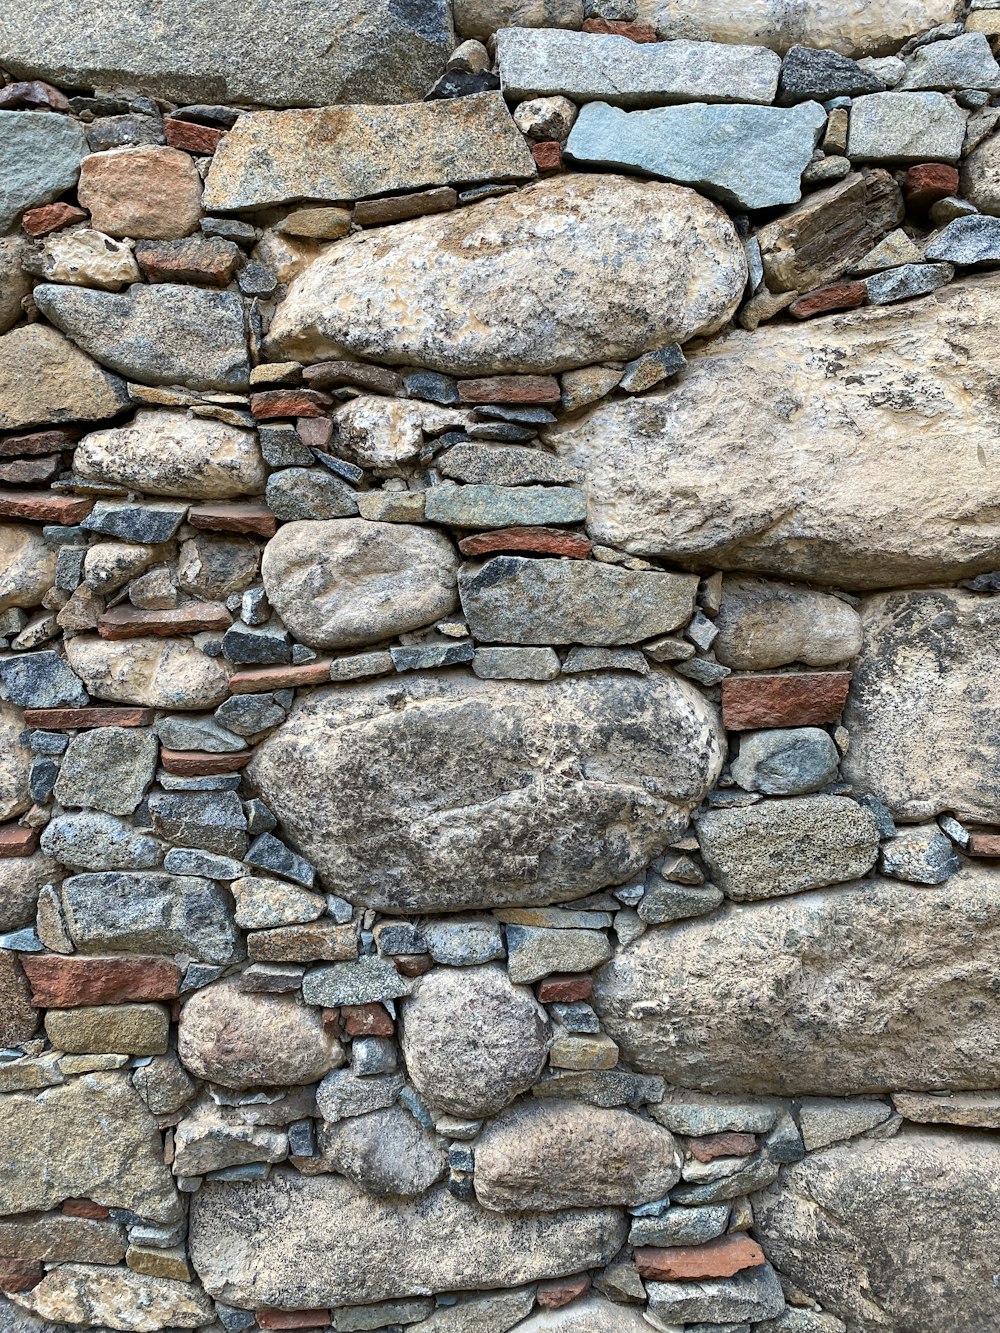 a stone wall made of rocks and stones